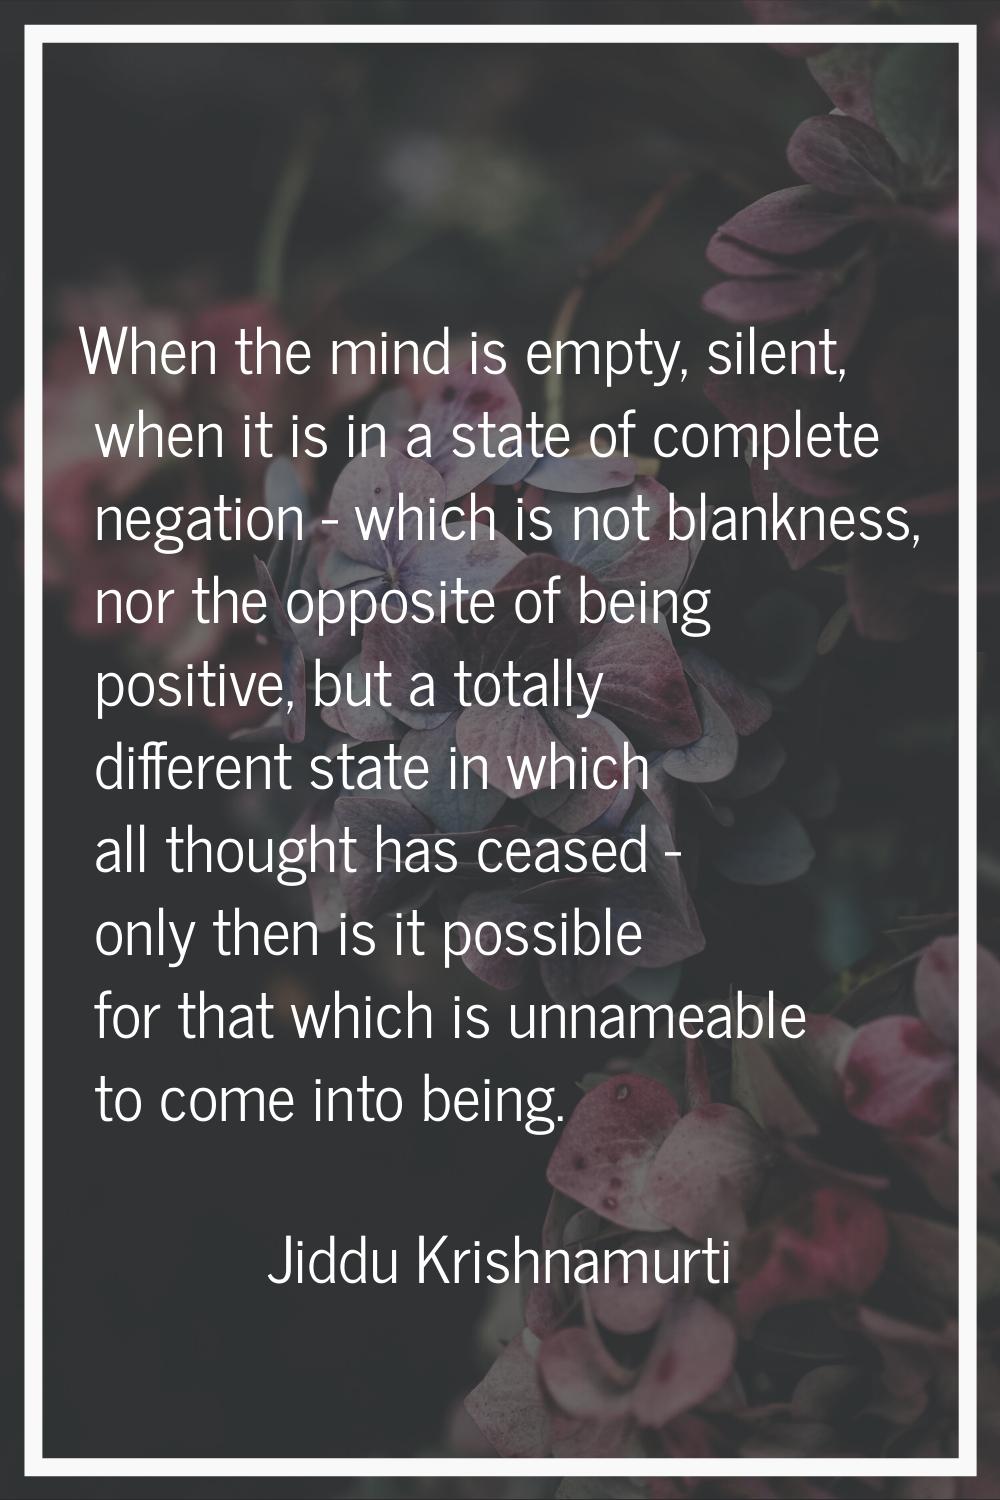 When the mind is empty, silent, when it is in a state of complete negation - which is not blankness